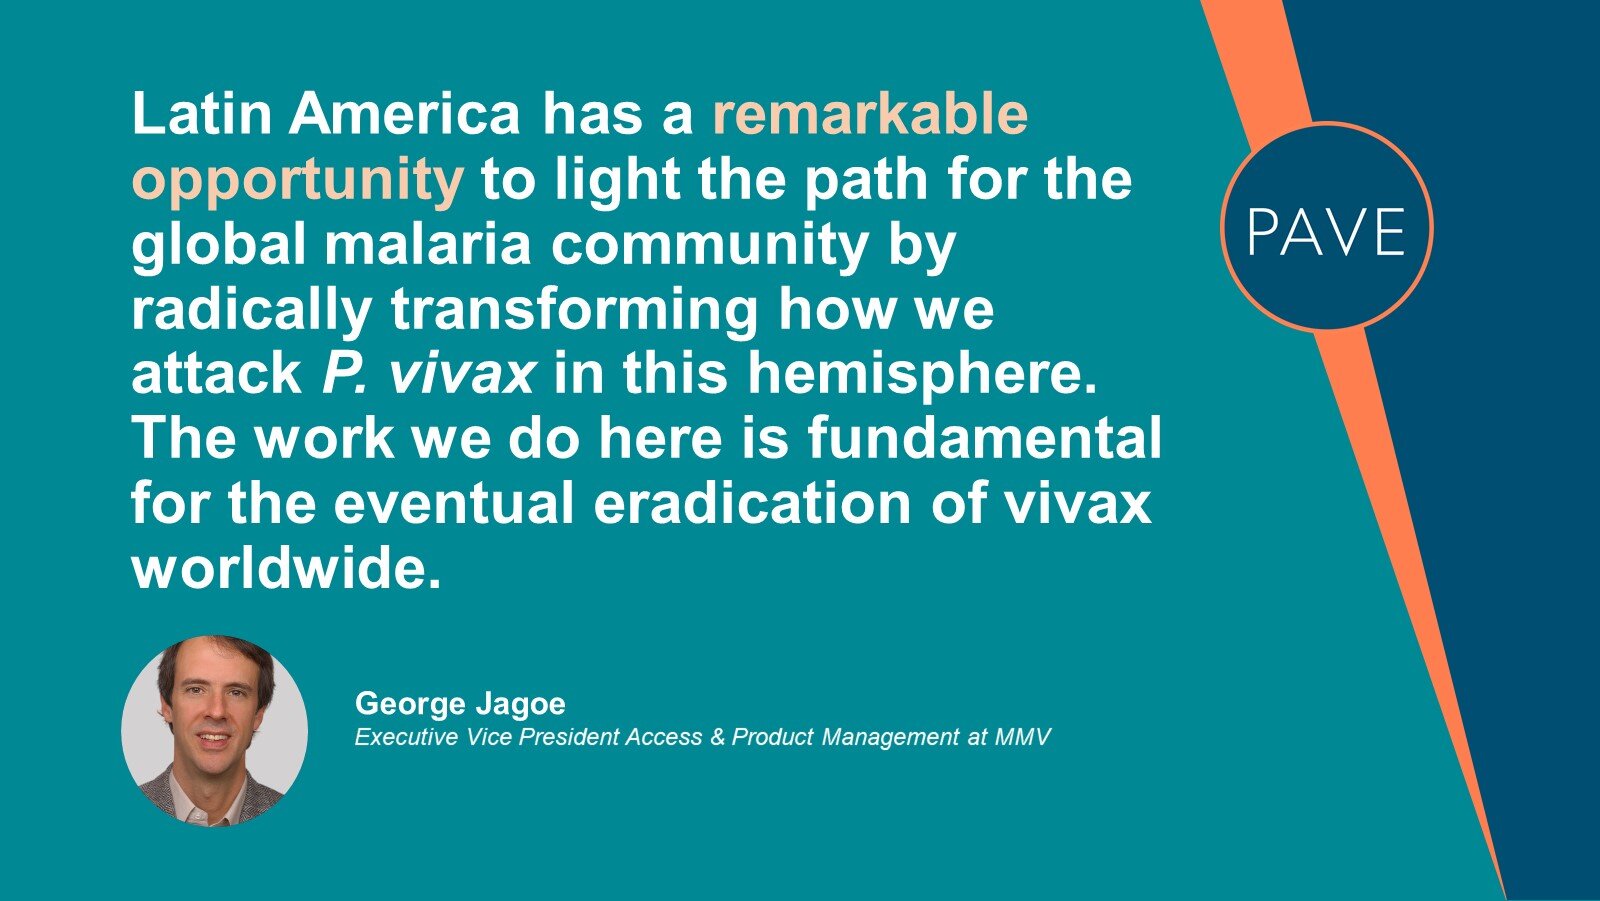 Quote from George Jagoe, MMV